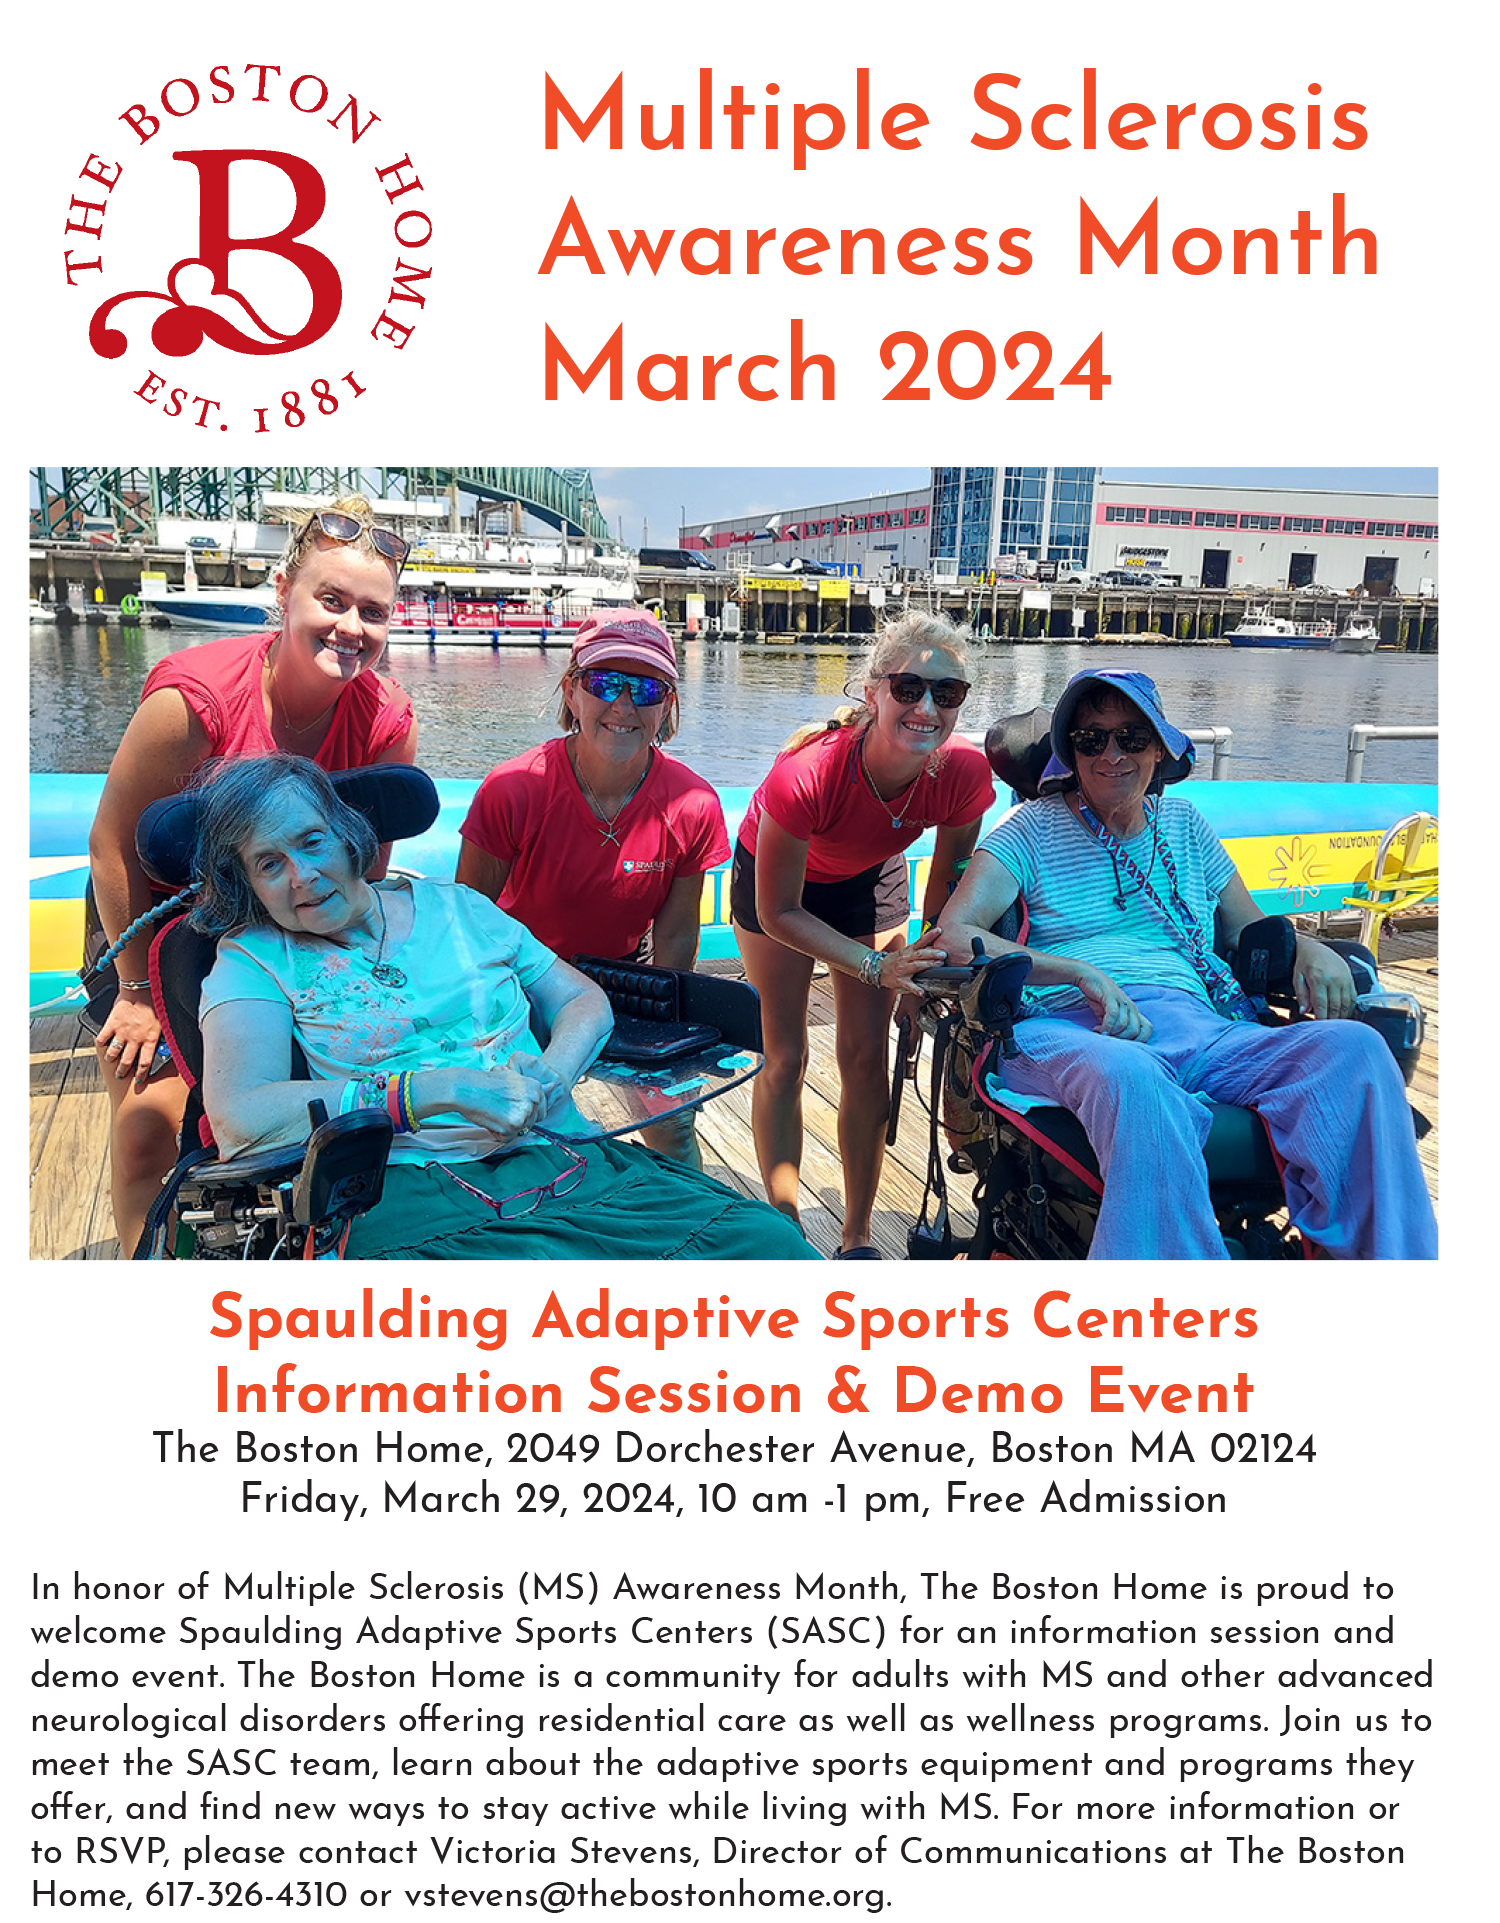 Spauling Adaptive Sports Clinic Flyer